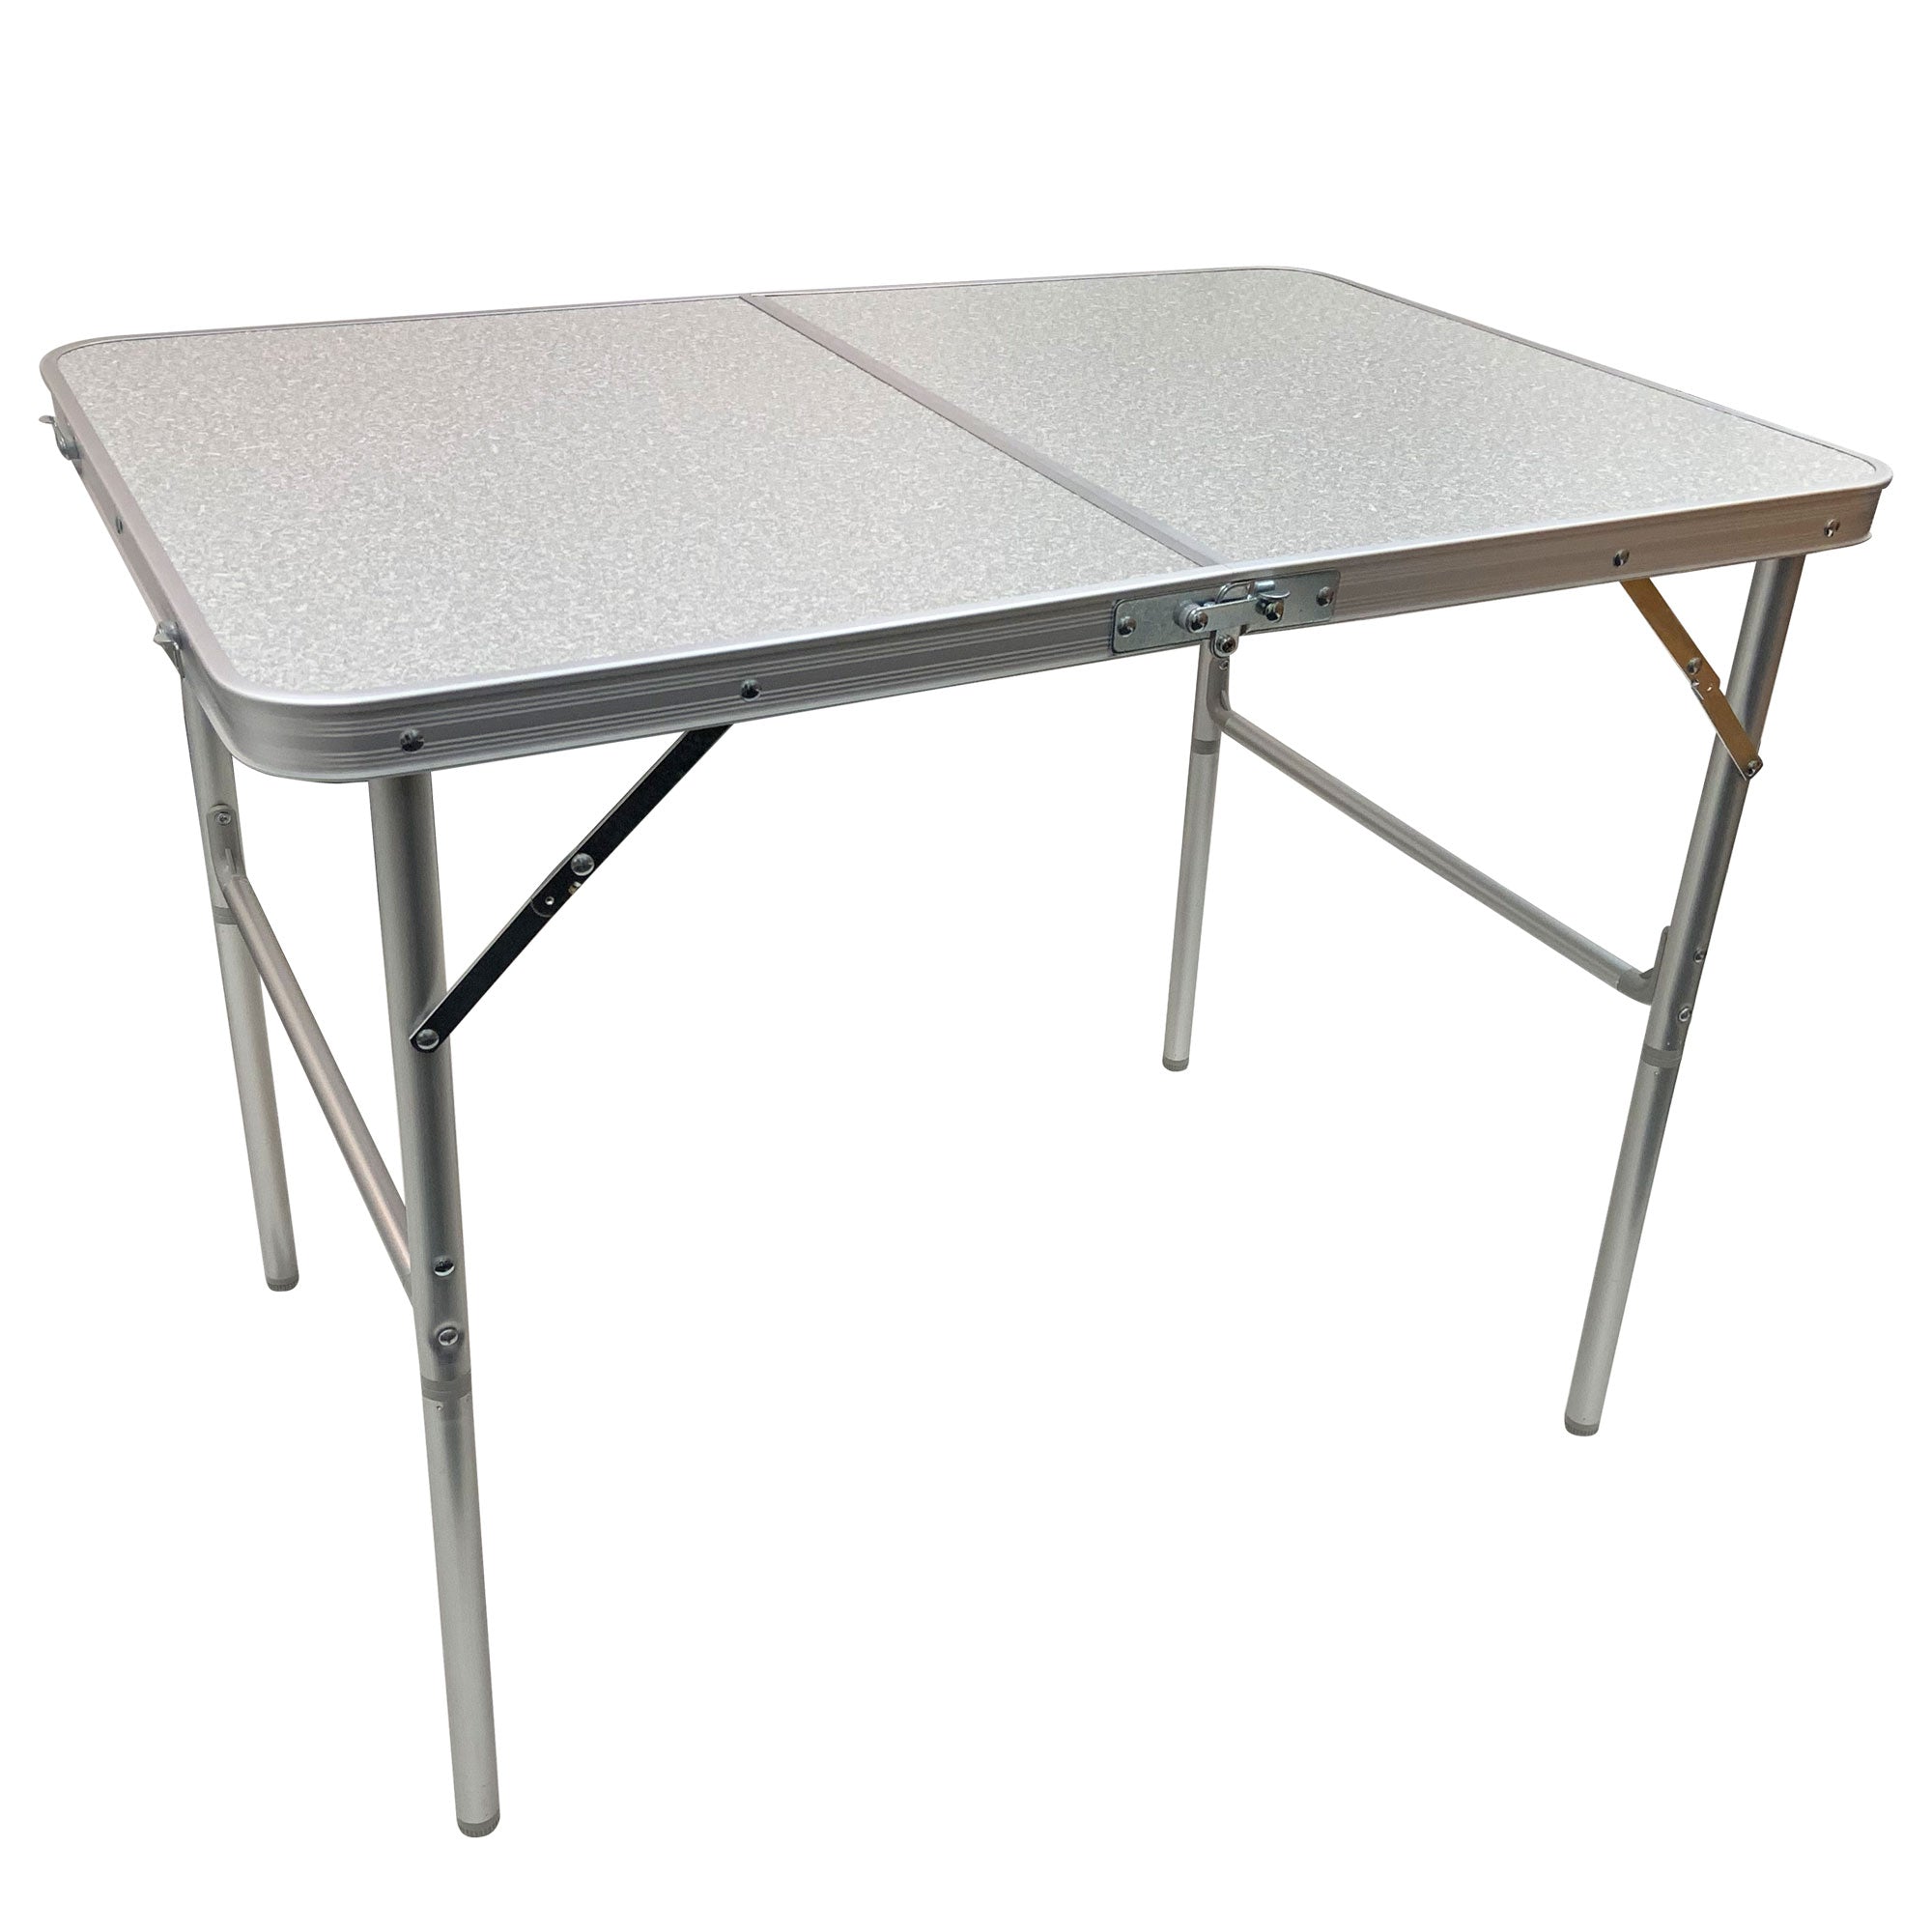 Campmaster 90 x 60 cm Camping Table – Campmaster NZ